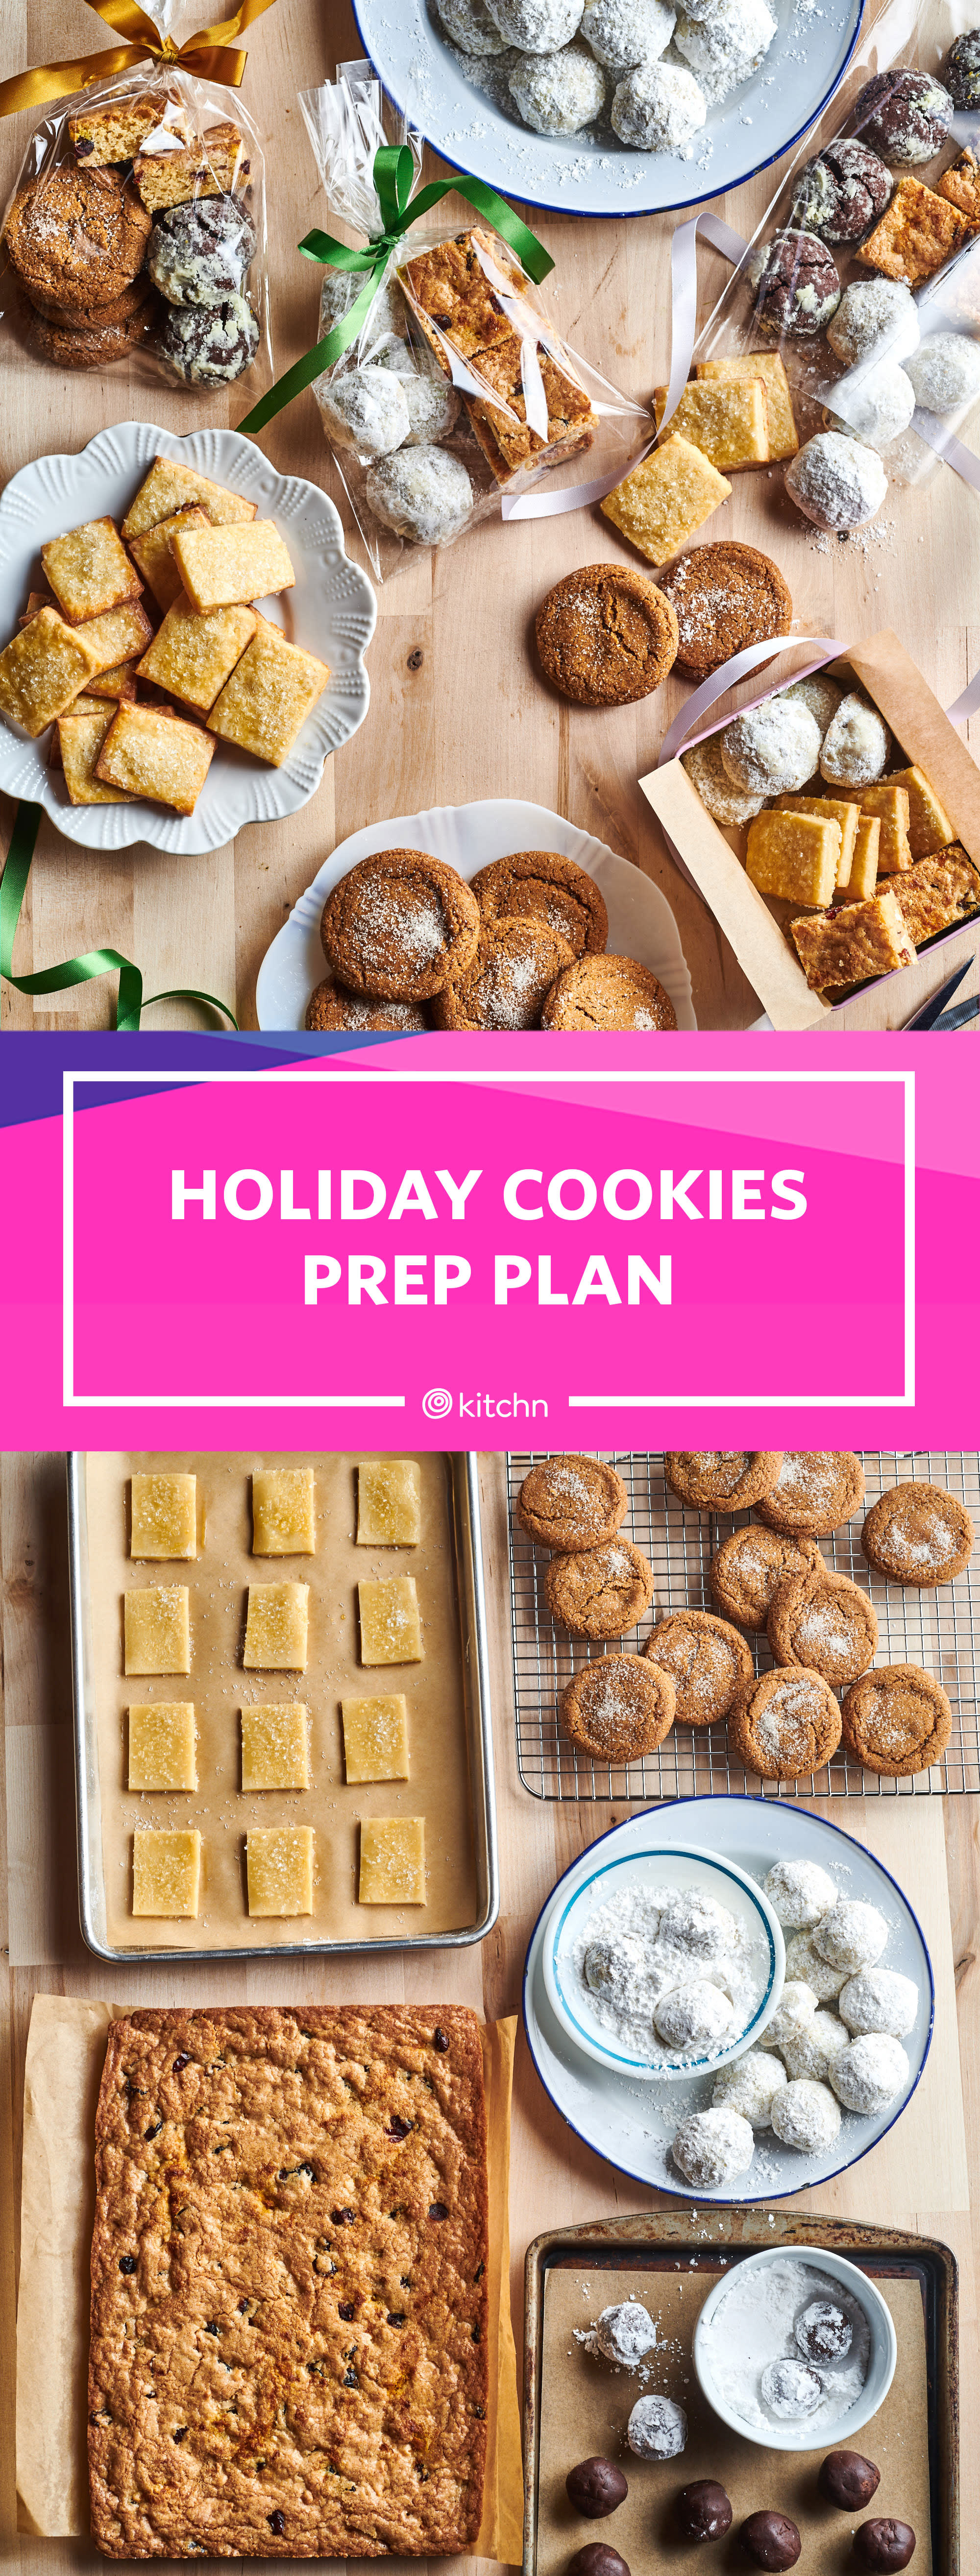 https://cdn.apartmenttherapy.info/image/upload/v1605308855/k/Photo/Series/2020-11-How-to-Prep-All-Your-Cookies-for-Holiday-Baking-in-Just-2-Hours%20/power-hour-cookies-custom-pin.jpg